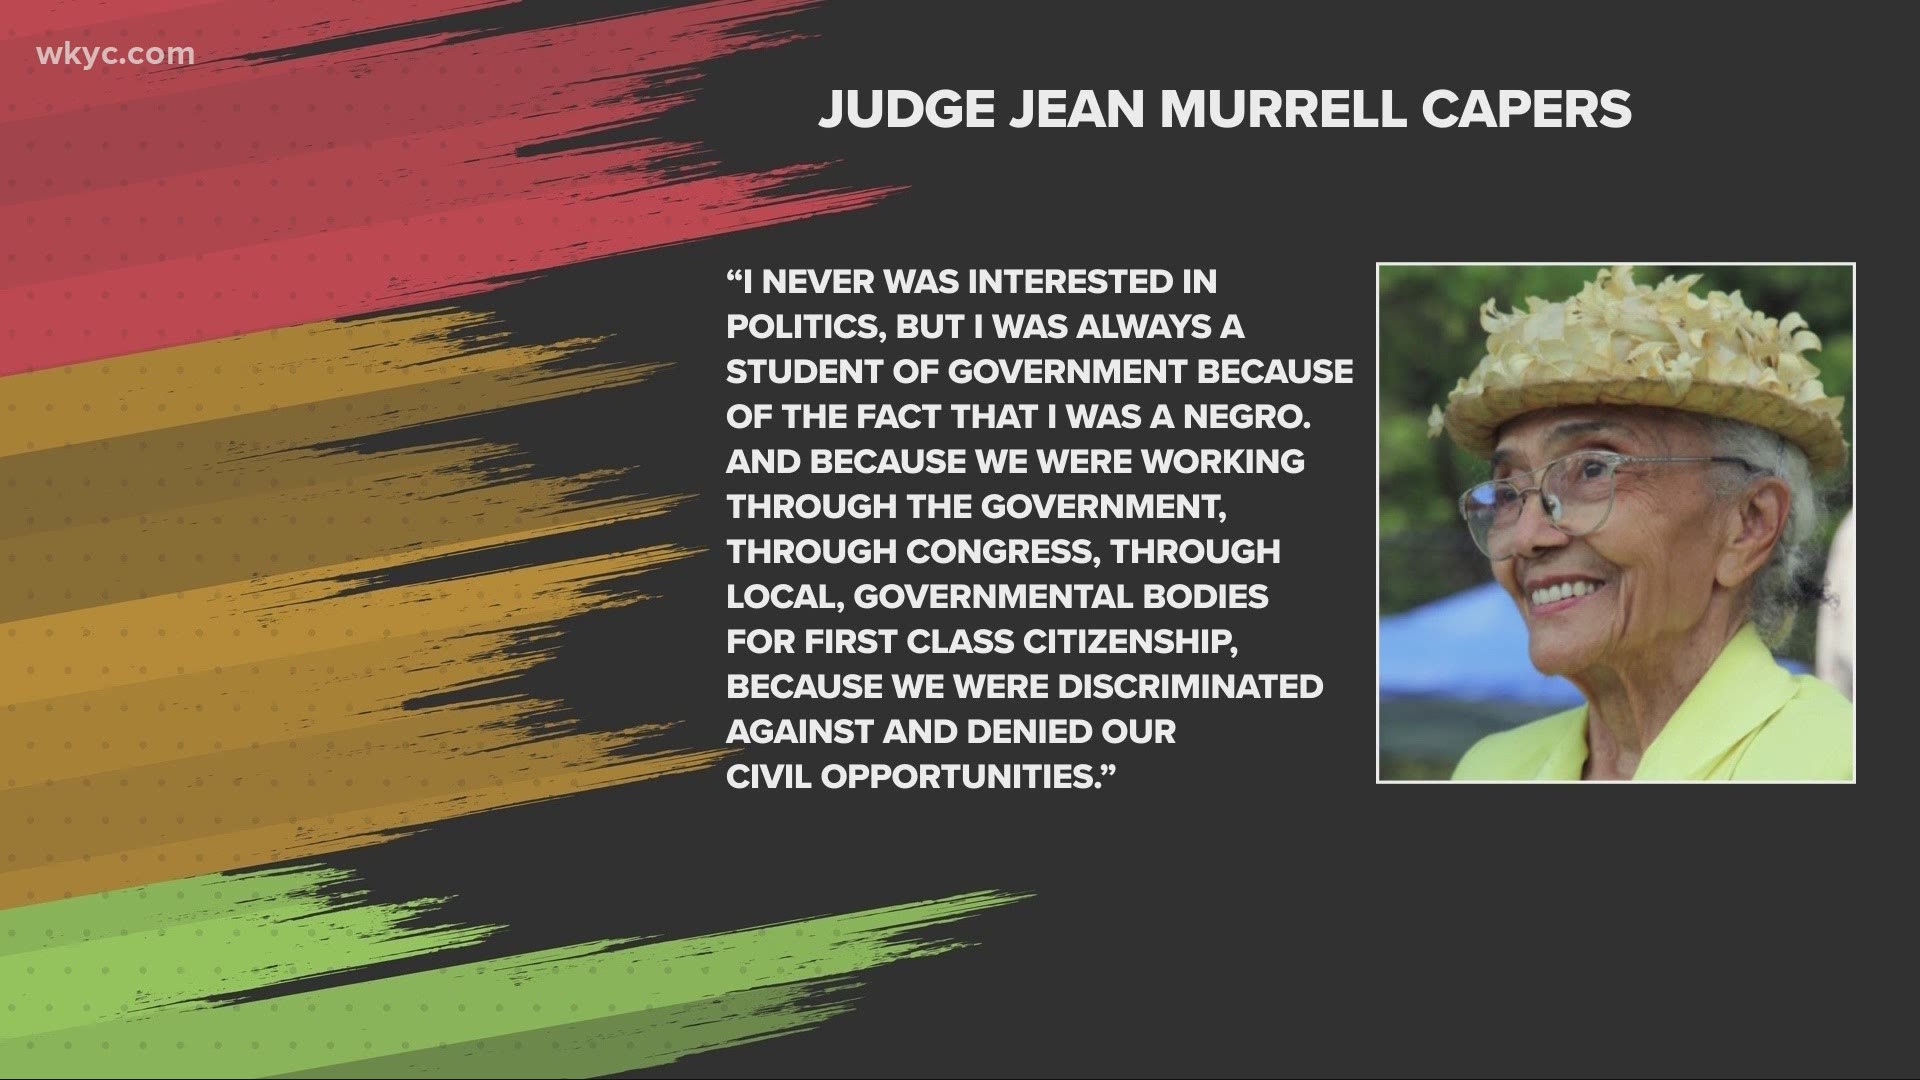 Feb. 2, 2021: In today's Black History Moment, we honor Judge Jean Murrell Capers, a trailblazer in Cleveland politics and the field of law.